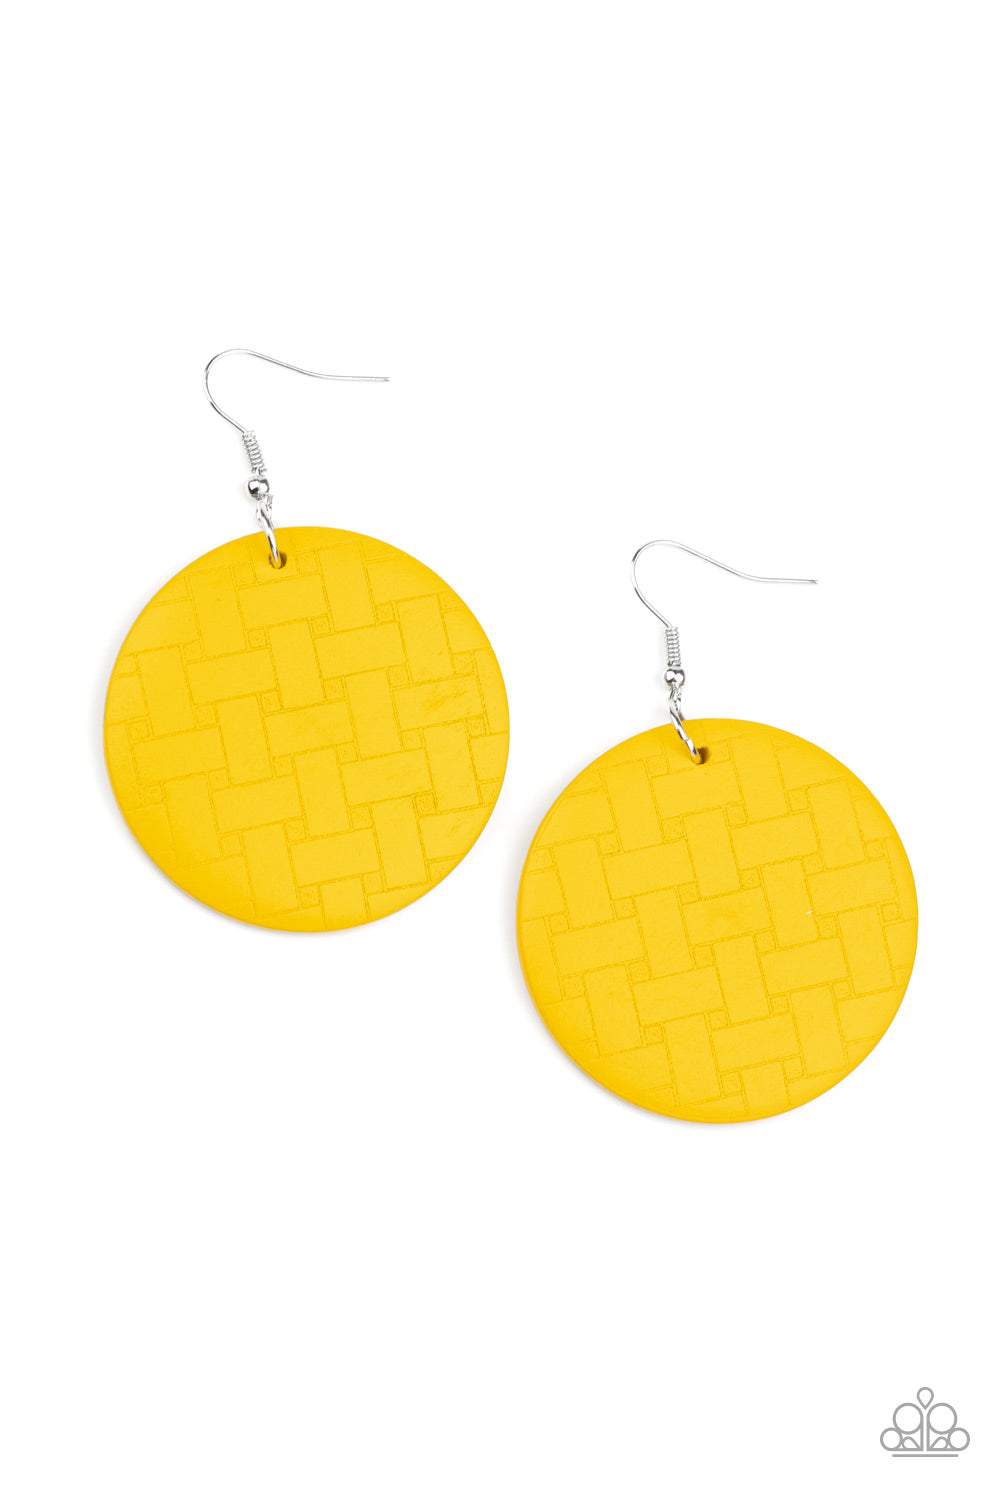 Natural Novelty Earrings - Yellow